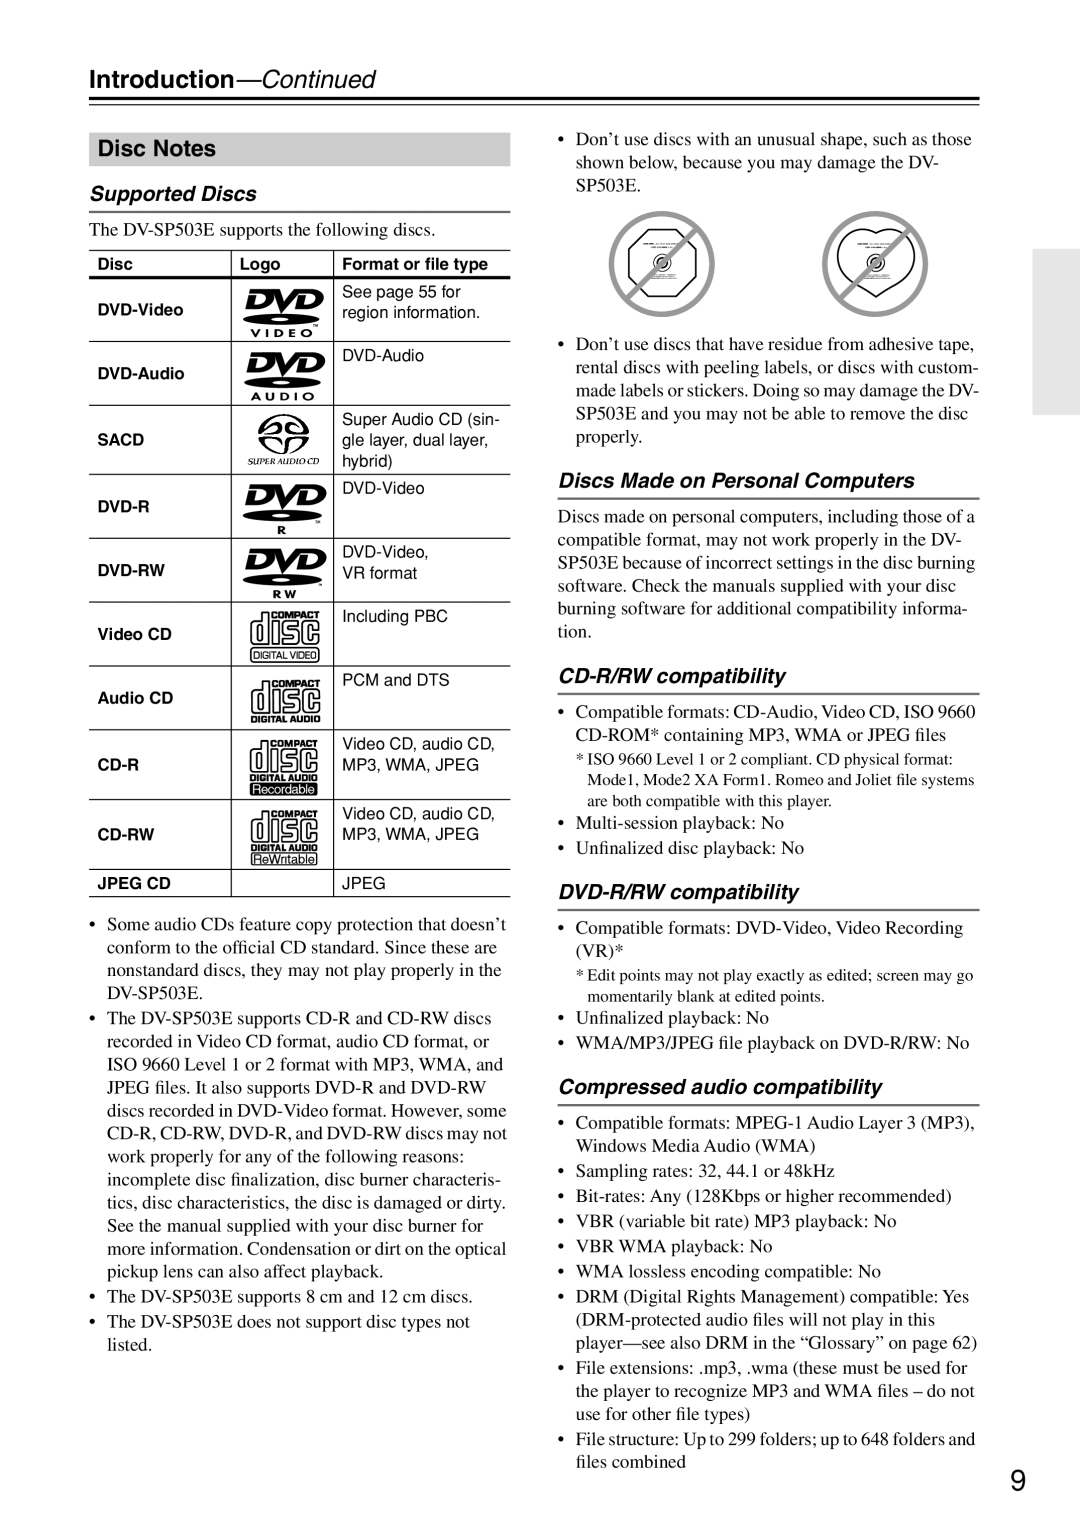 Onkyo DV-SP503E instruction manual Disc Notes, Introduction-Continued, Supported Discs, Discs Made on Personal Computers 